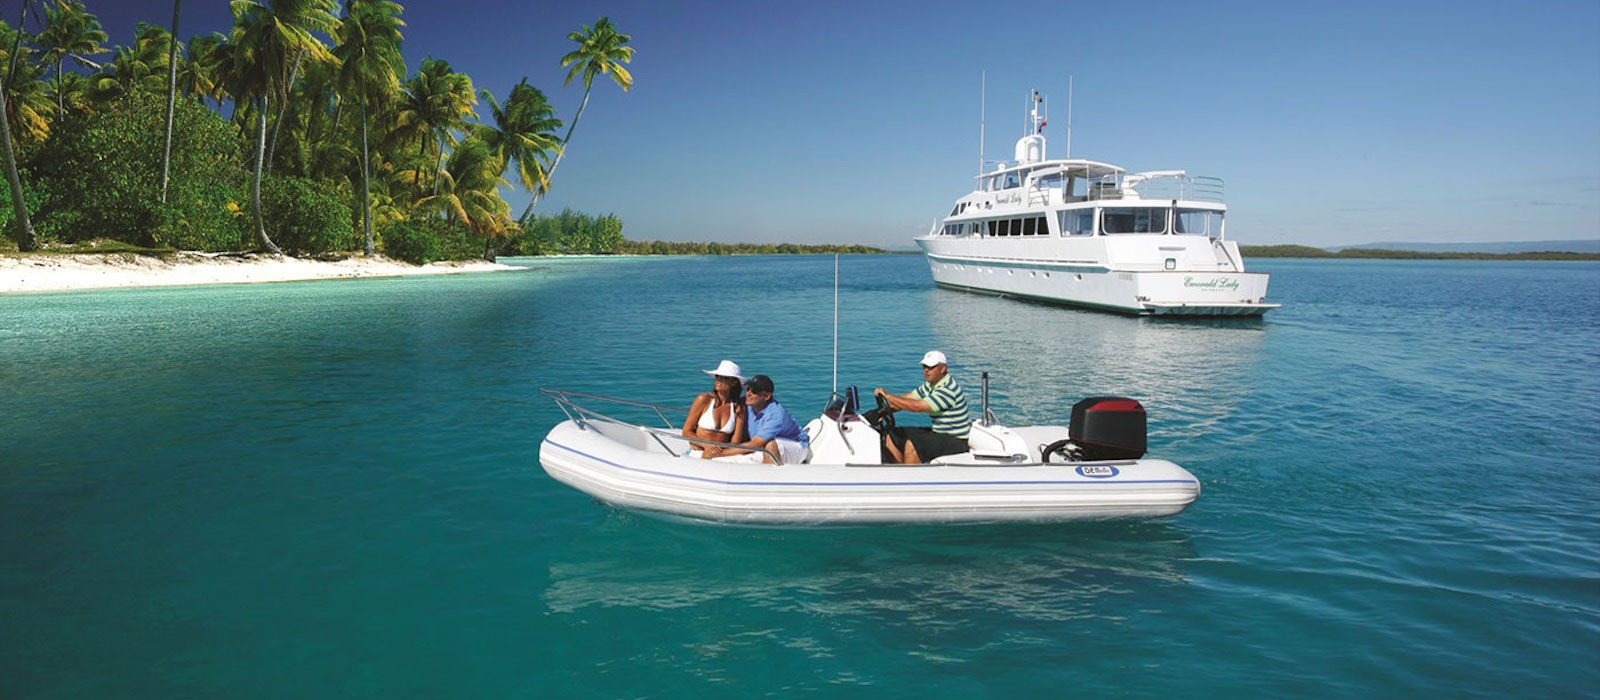 luxury boat hire on Emerald Lady on calm waters